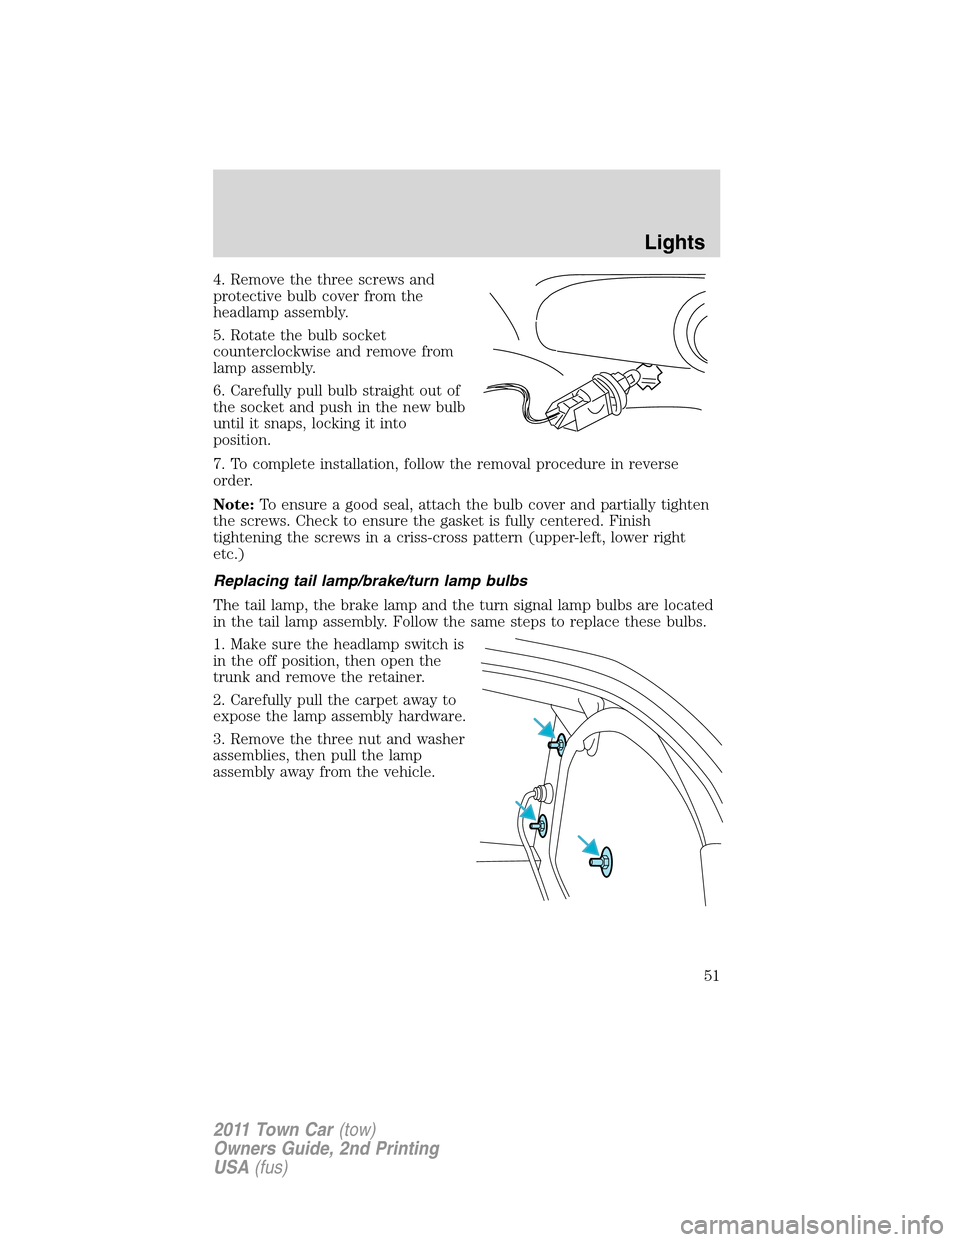 LINCOLN TOWN CAR 2011 Workshop Manual 4. Remove the three screws and
protective bulb cover from the
headlamp assembly.
5. Rotate the bulb socket
counterclockwise and remove from
lamp assembly.
6. Carefully pull bulb straight out of
the so